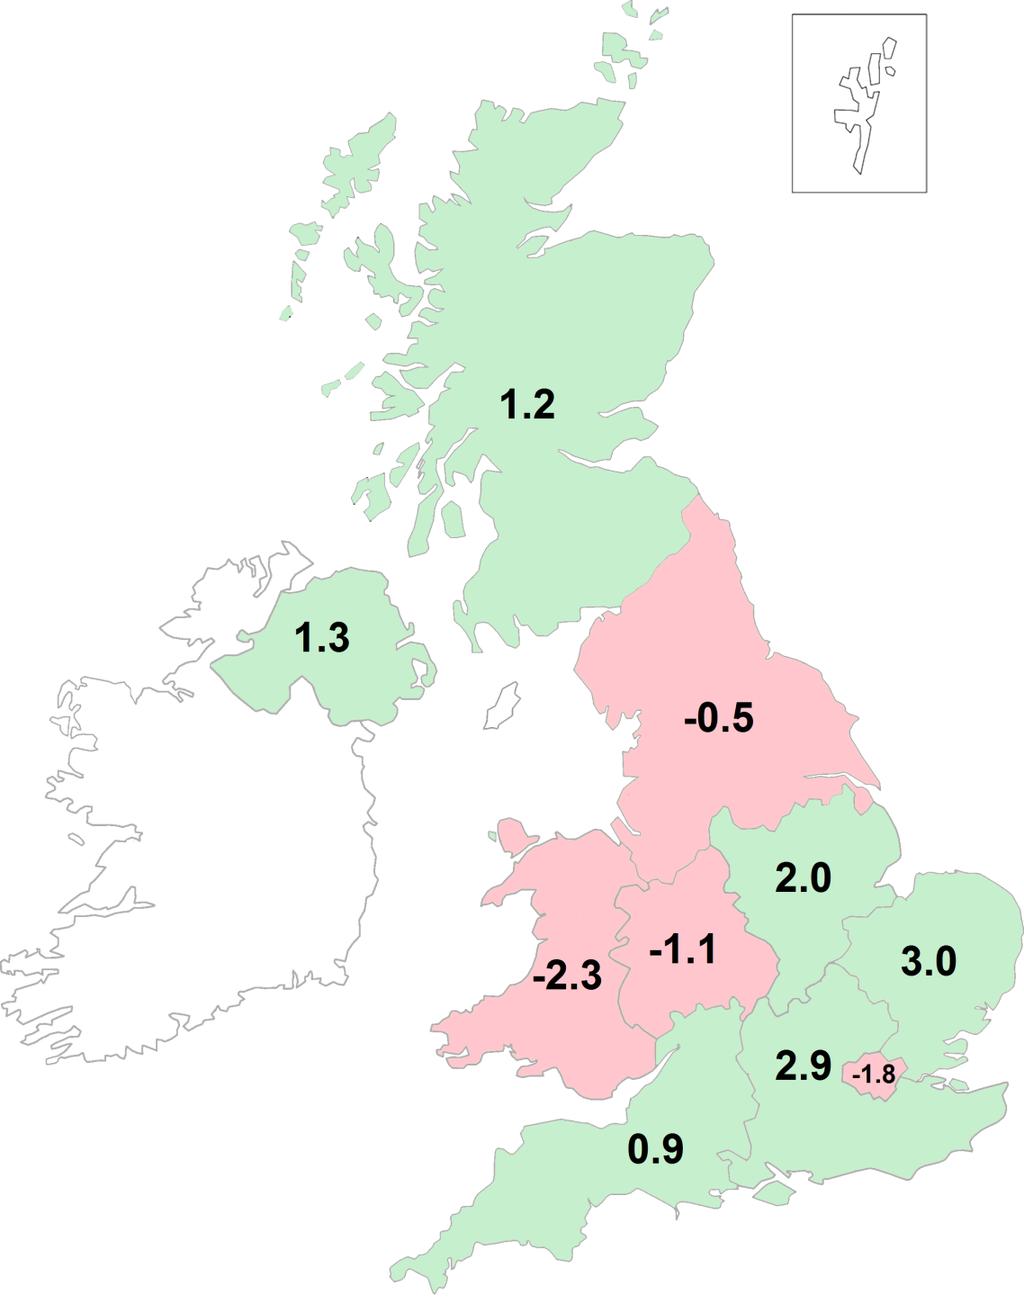 Country and Region Footfall Analysis Four regions in England reported positive footfall growth in February East (3.0%), South East (2.9%),